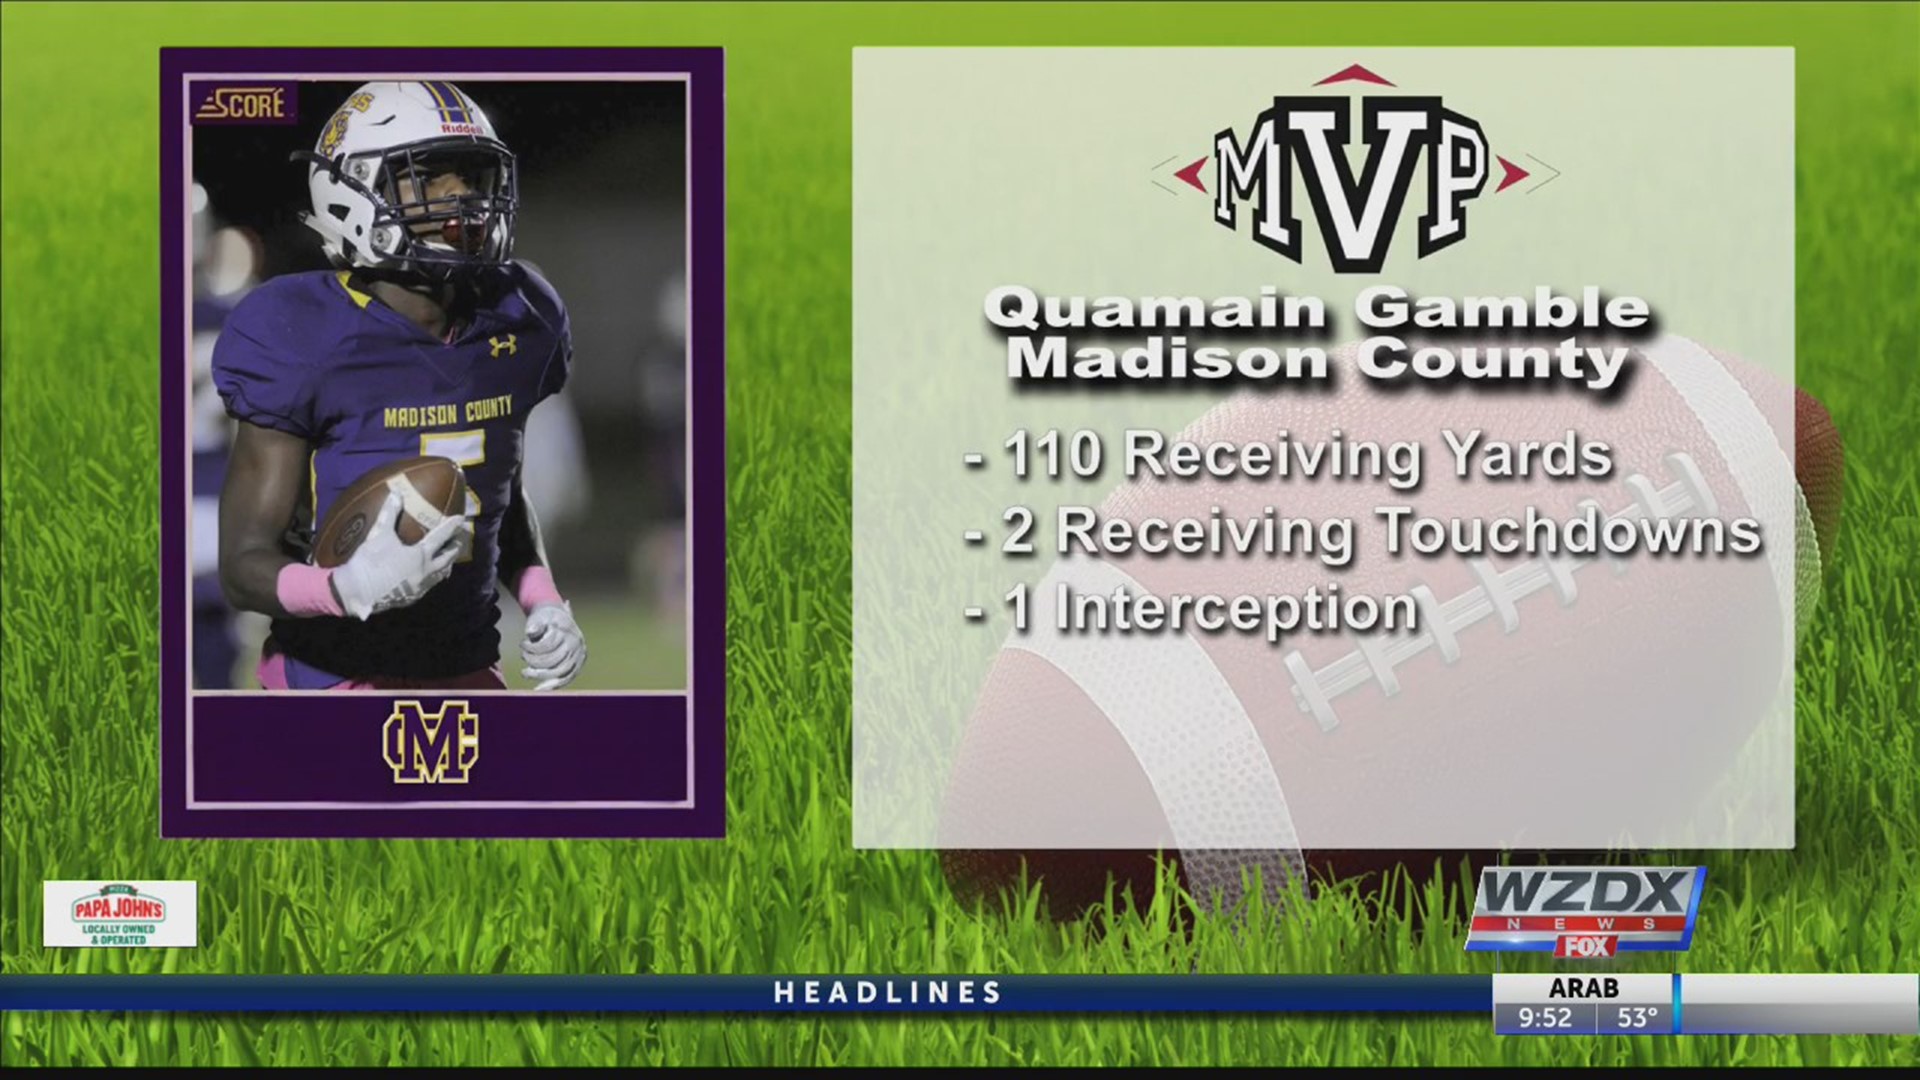 Madison County's Quamain Gamble scored two touchdowns and intercepted a pass in the 1st quarter of the Tigers' contest with Madison Academy last week. Those big plays set the tone in the Tigers 49-21 victory over the Mustangs. For his efforts, Gamble is the newest FDFN MVP of the Week.